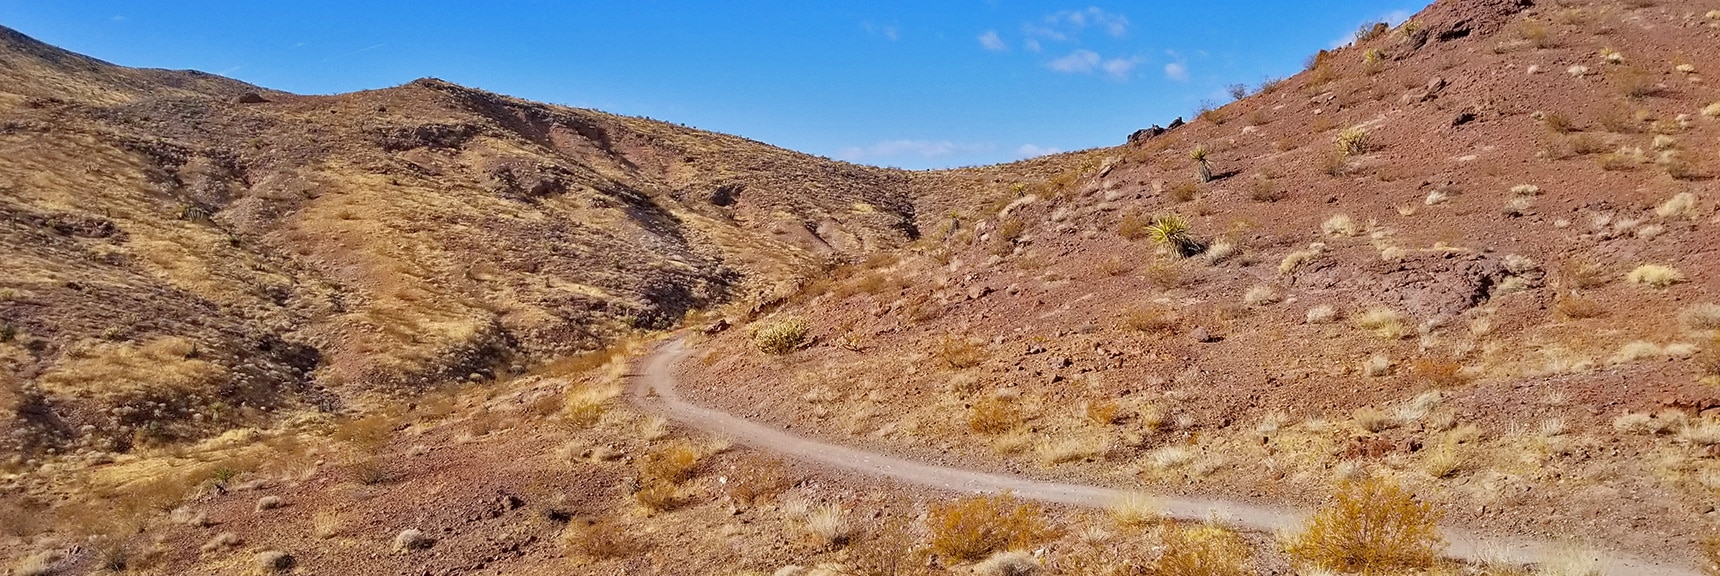 Rounding the Canyon Toward Anthem Area | McCullough Hills Trail in Sloan Canyon National Conservation Area, Nevada